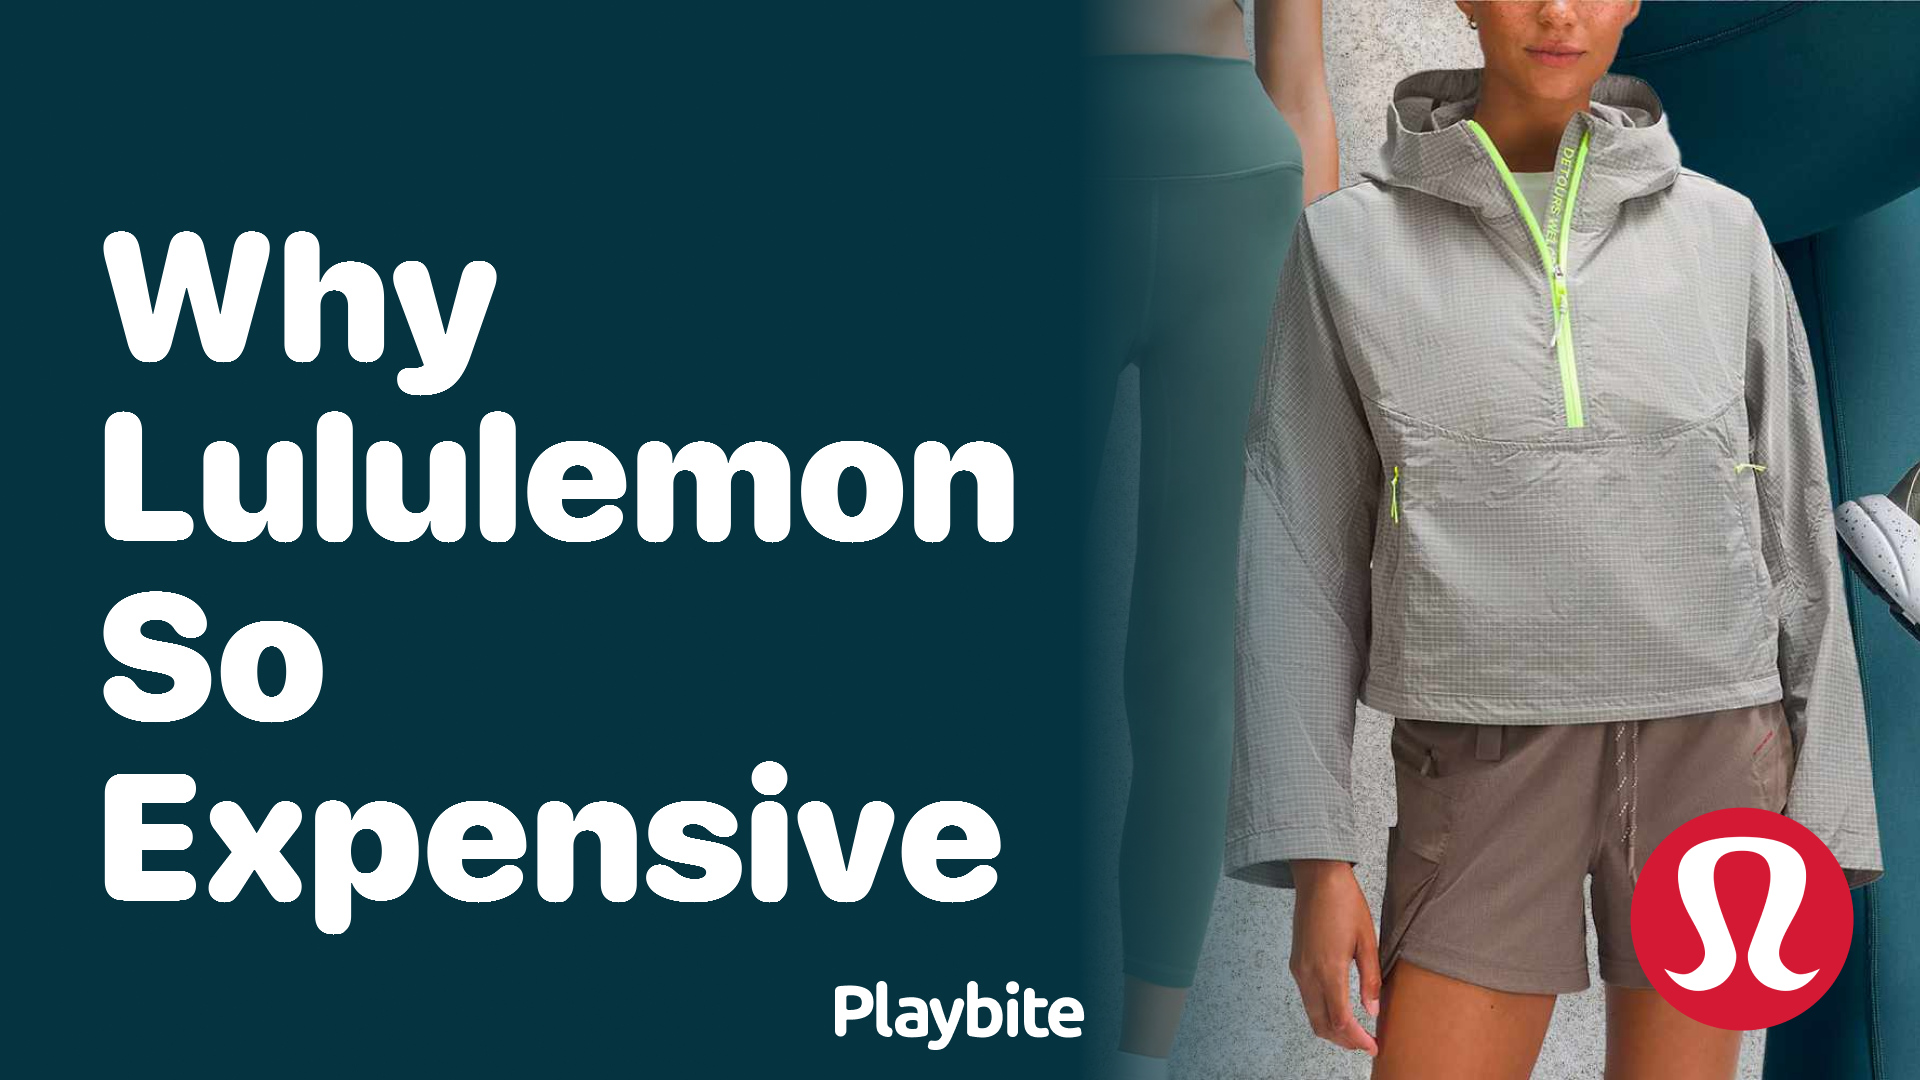 Why Is Lululemon So Expensive?